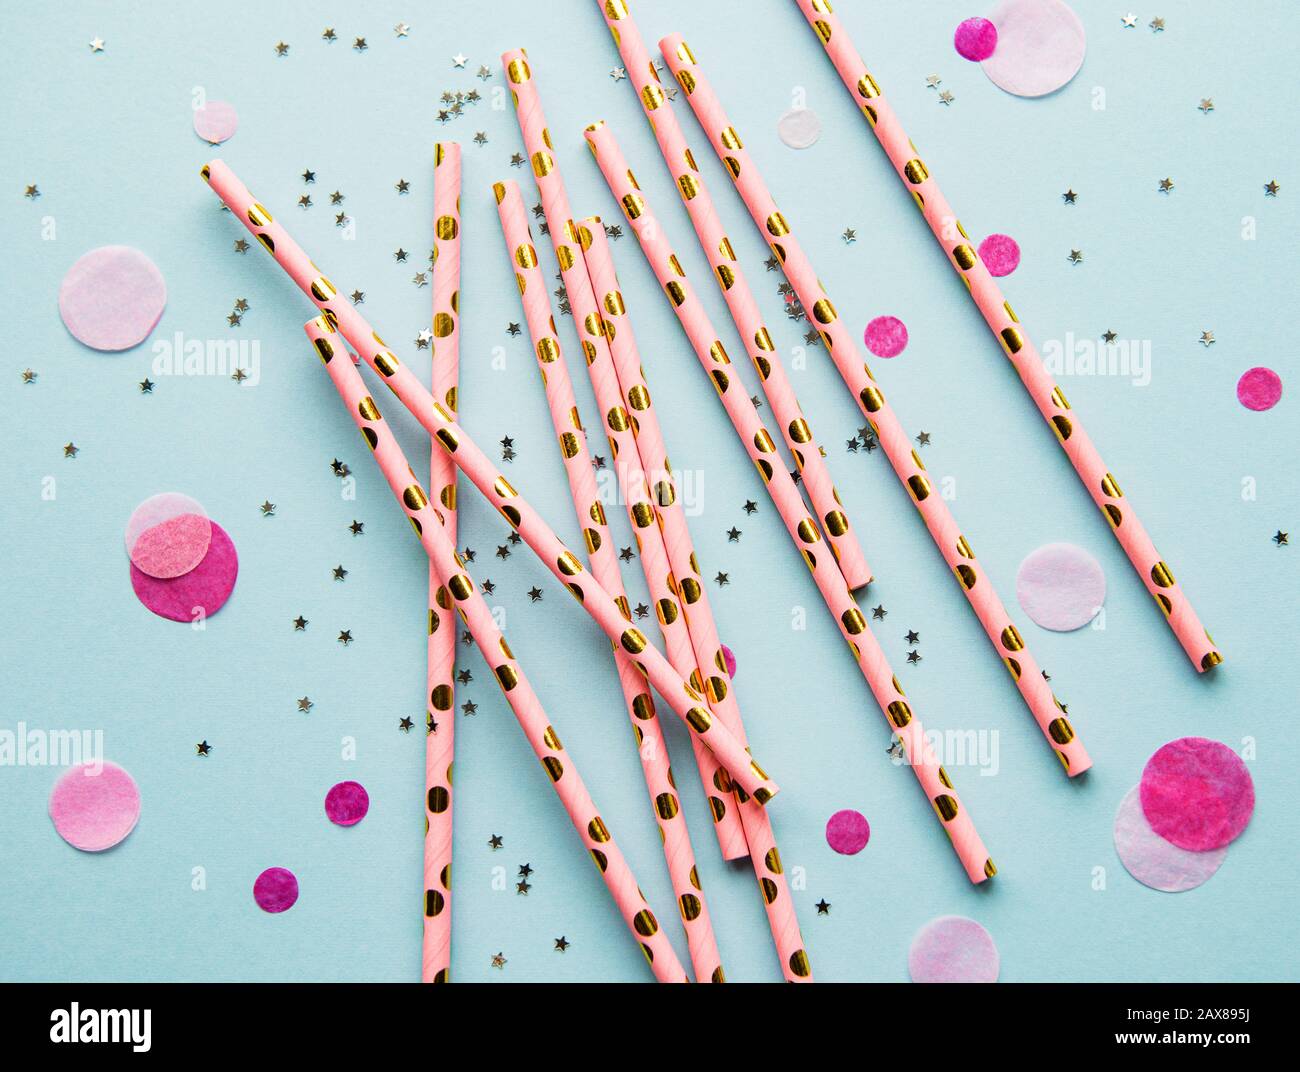 Drinking straws for party and confetti on blue background with copy space. Top view of colorful paper disposable eco-friendly straws for summer cockta Stock Photo